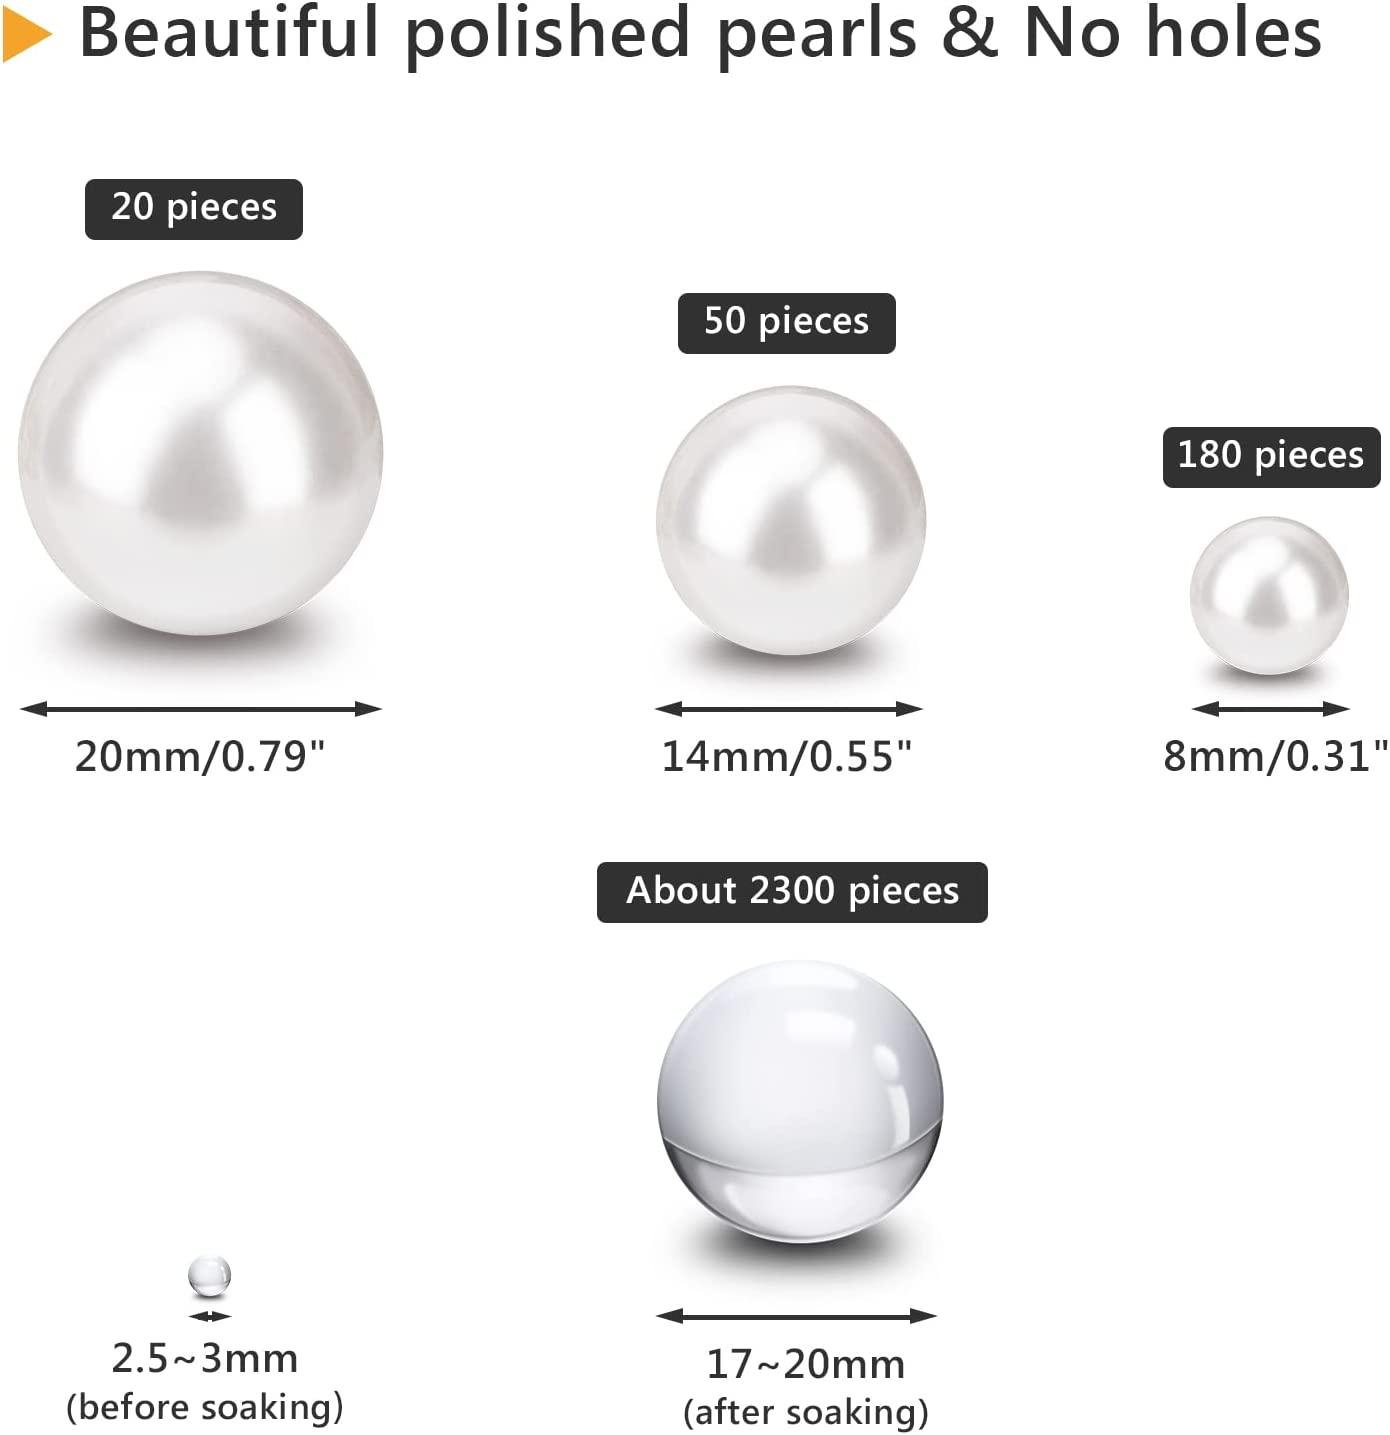 SUREAM No Hole Floating Pearls for Vase, 250PCS Artificial Beads and  2300PCS Clear Gel Beads for Candle Centerpieces, Wedding, Birthday, Brushes  Holder, Multipurpose Use Pearls (8/14/20mm, White)